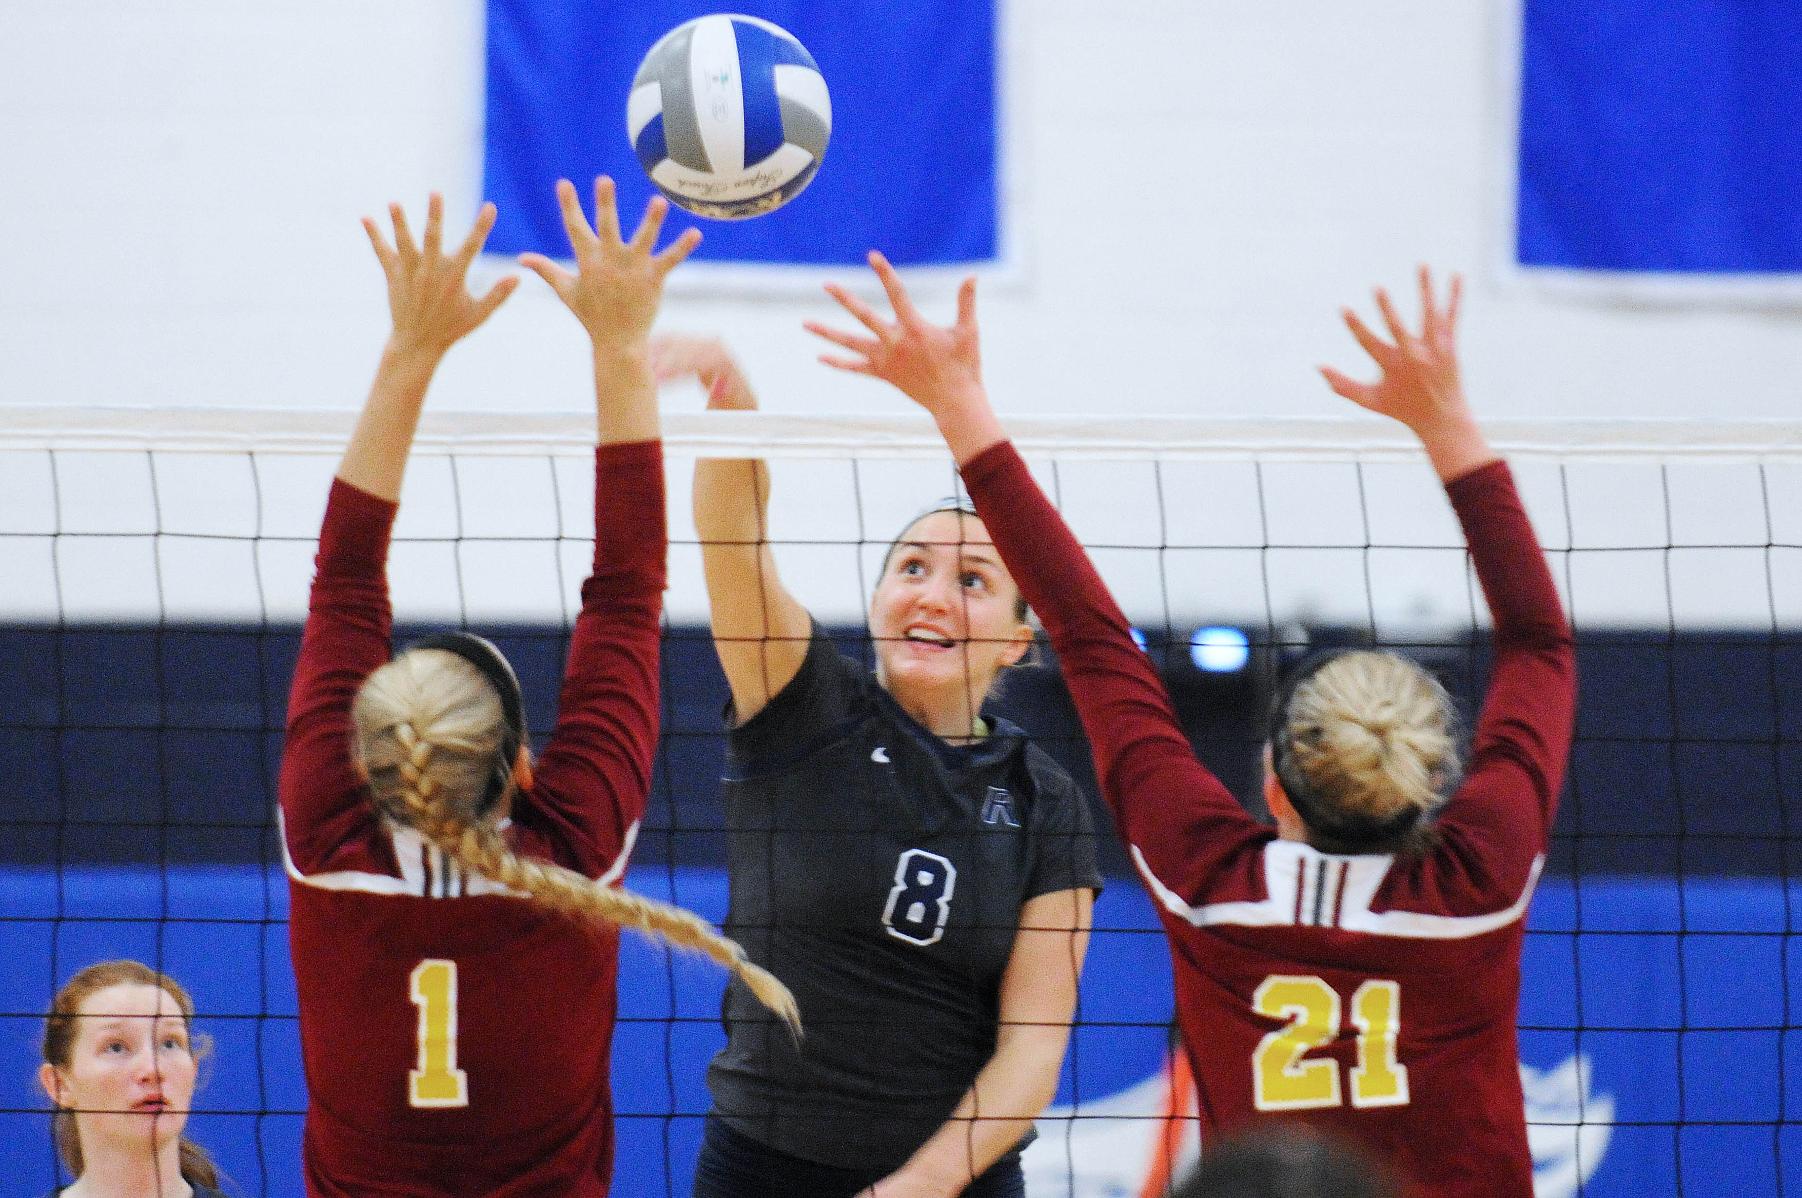 Women's Volleyball remains undefeated with wins over Regis and Colby